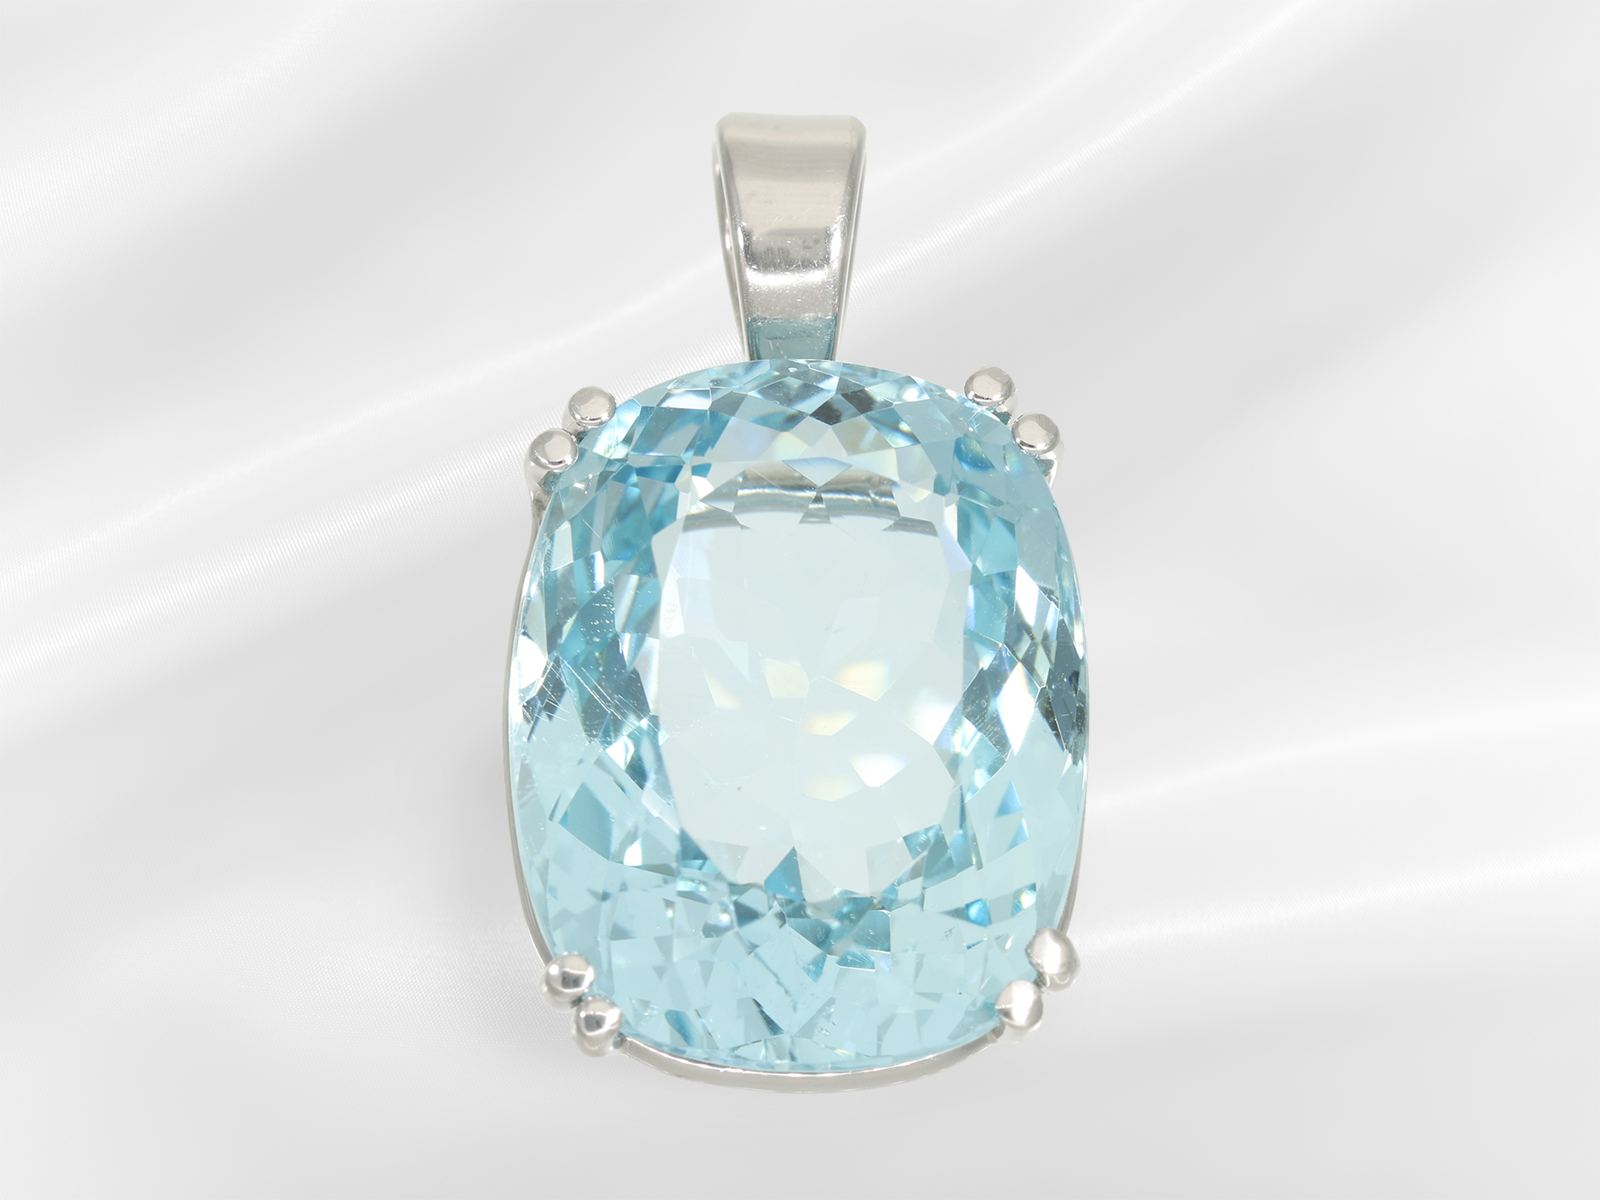 Pendant: very fine, white gold pendant with an unusually beautiful aquamarine, approx. 31ct